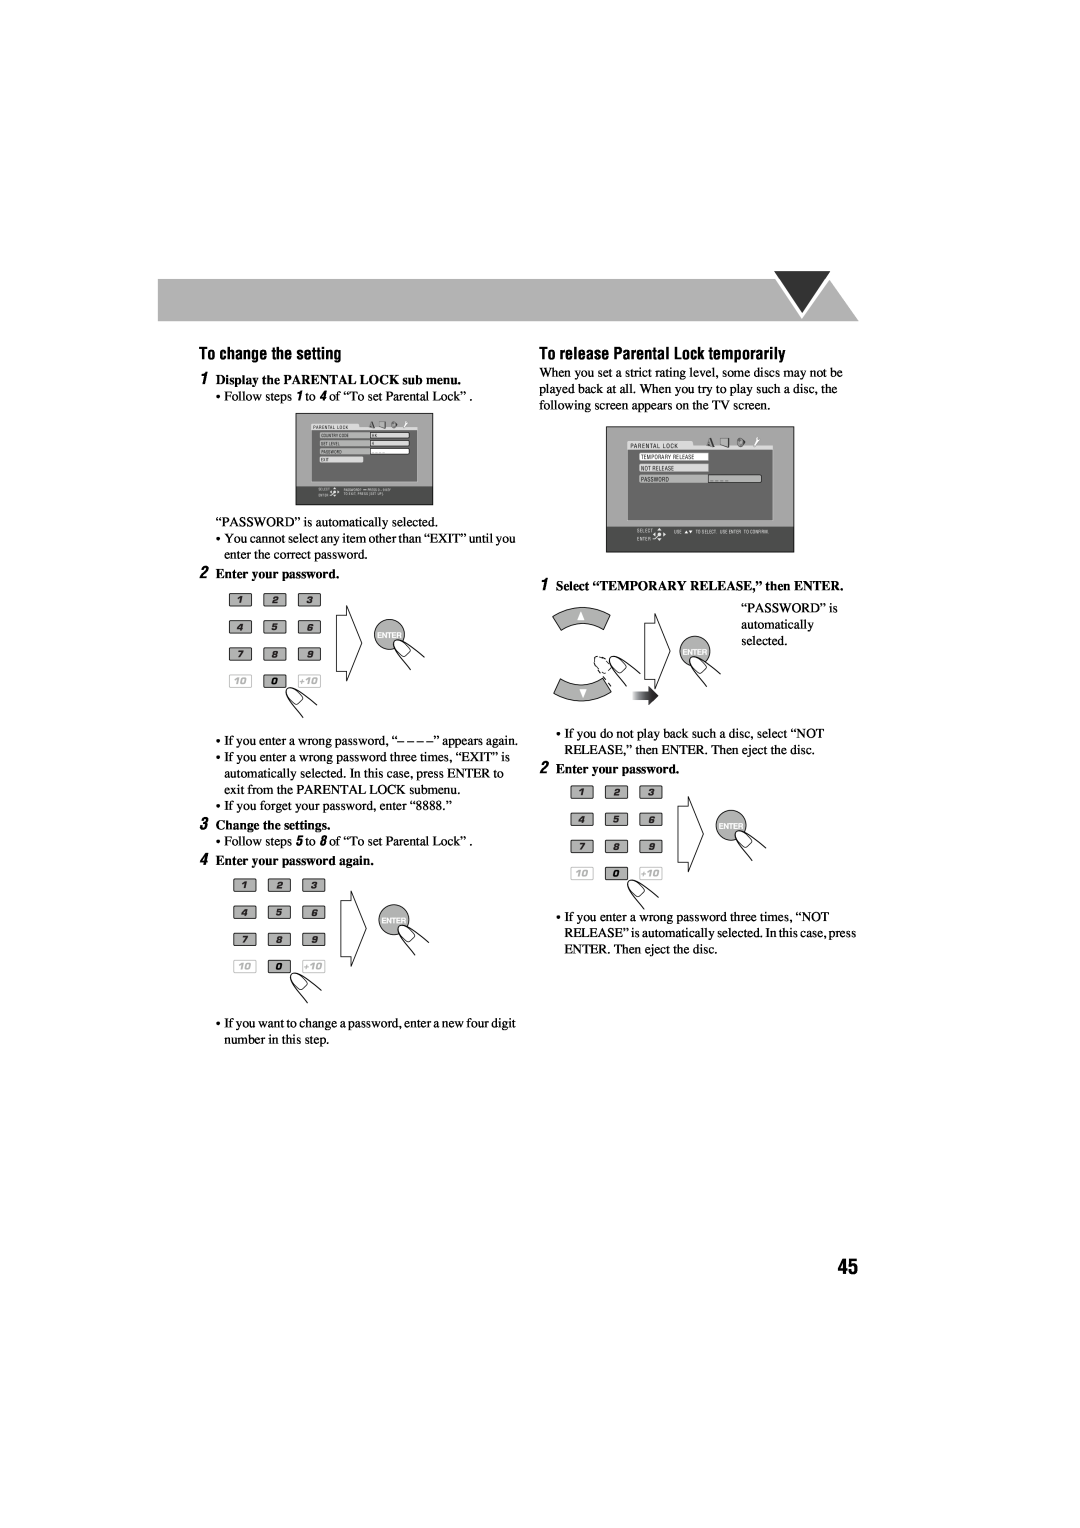 JVC GVT0125-003A manual To change the setting, To release Parental Lock temporarily, 1Display the PARENTAL LOCK sub menu 